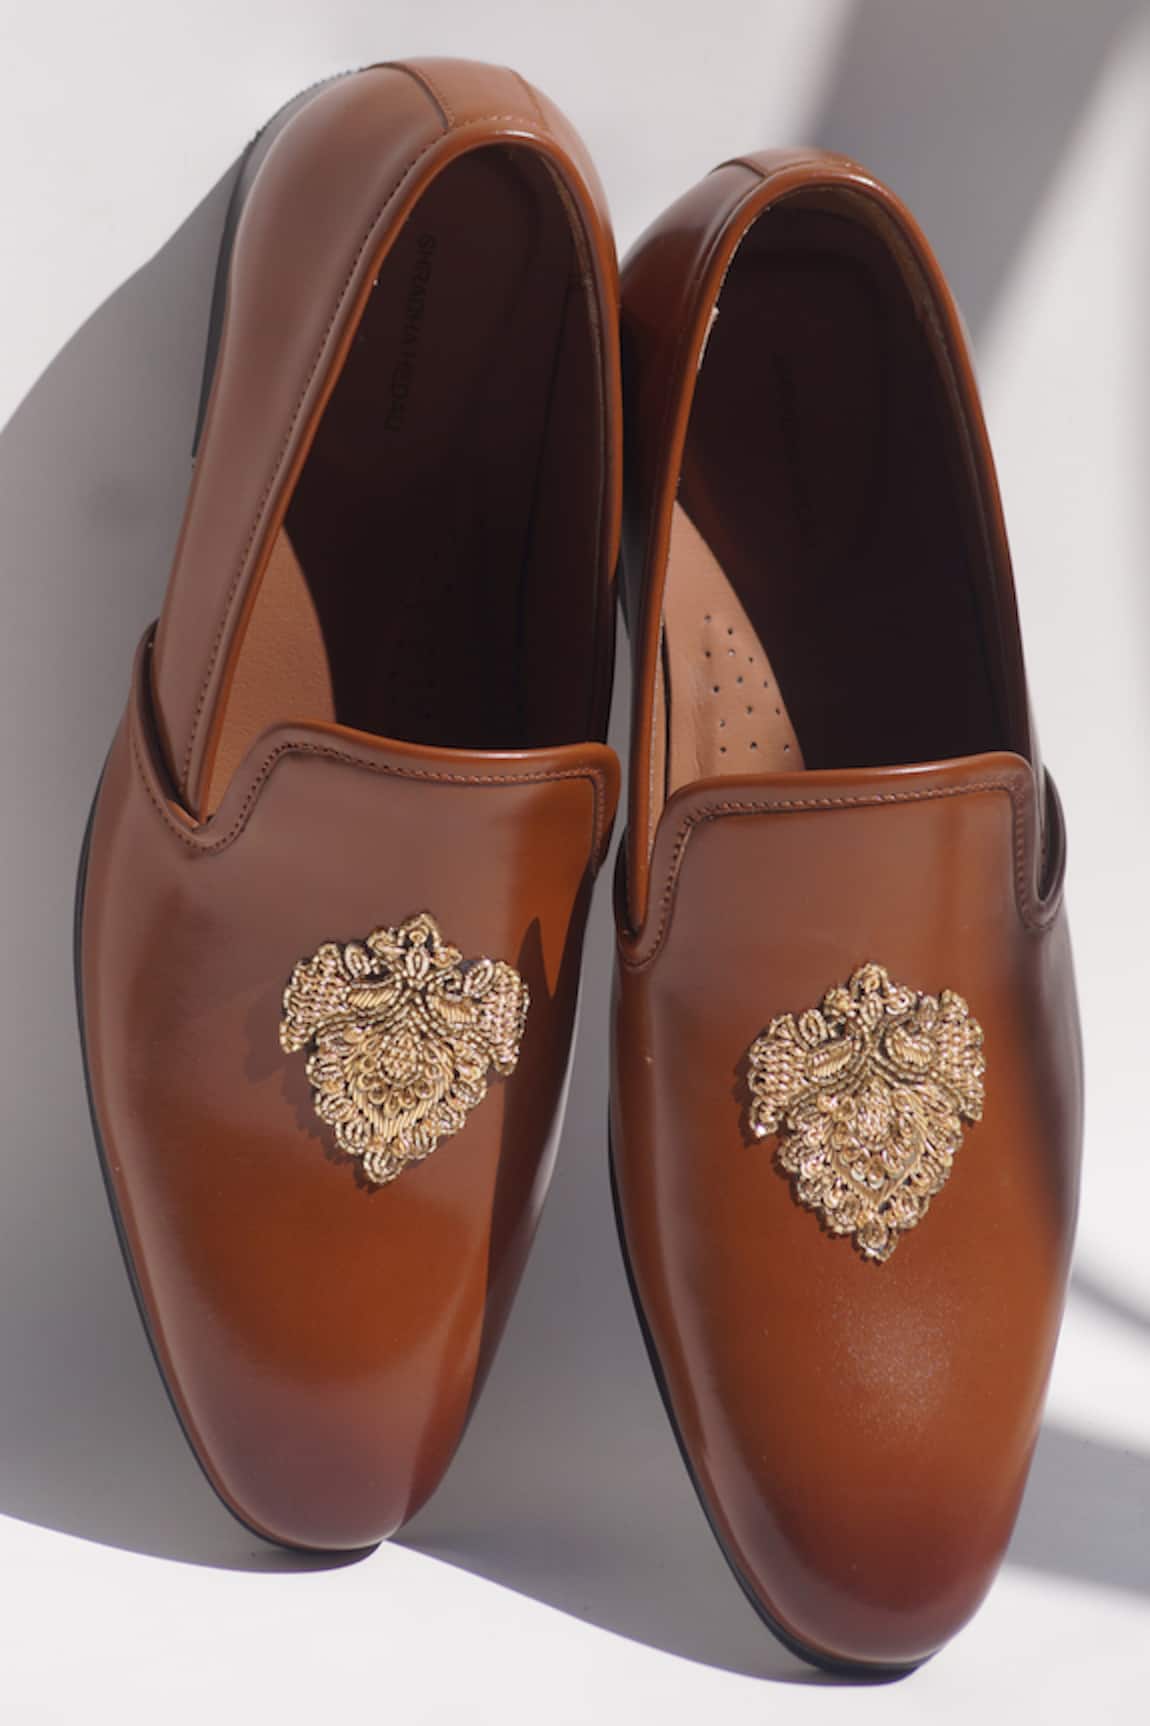 Shradha Hedau Footwear Couture Leather Embroidered Moccasins